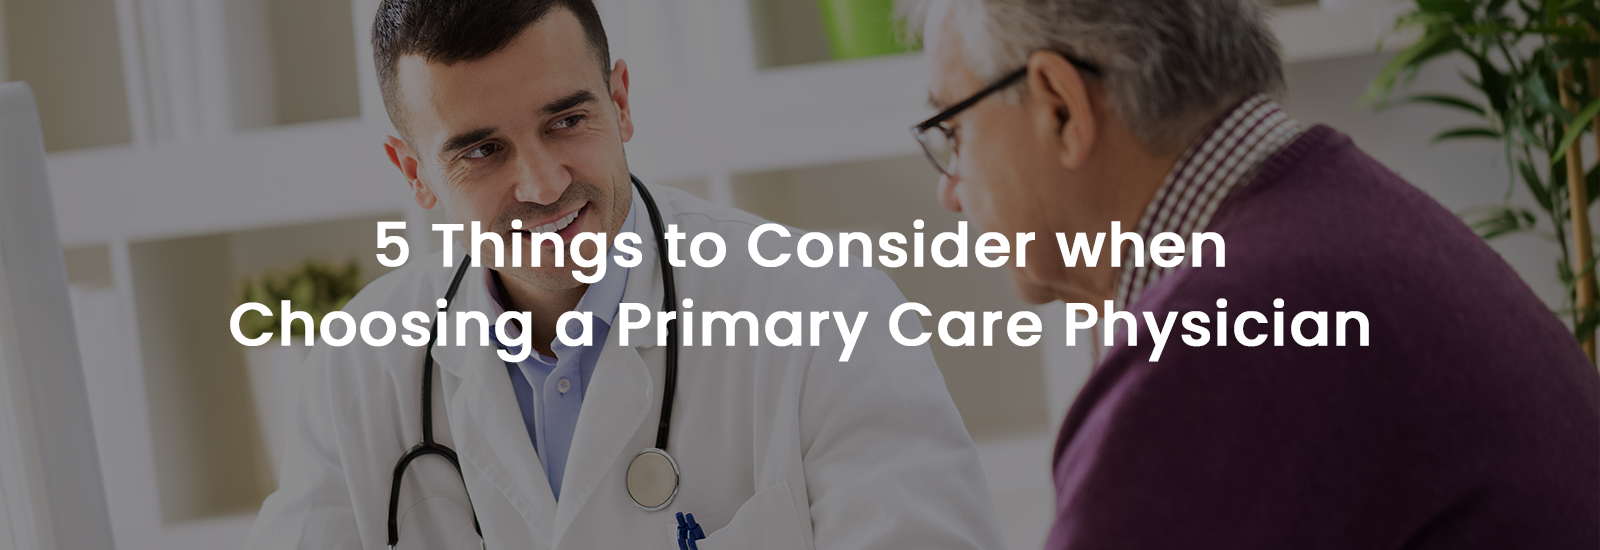 5 Things to Consider When Choosing a Primary Care Physician | Banner Image